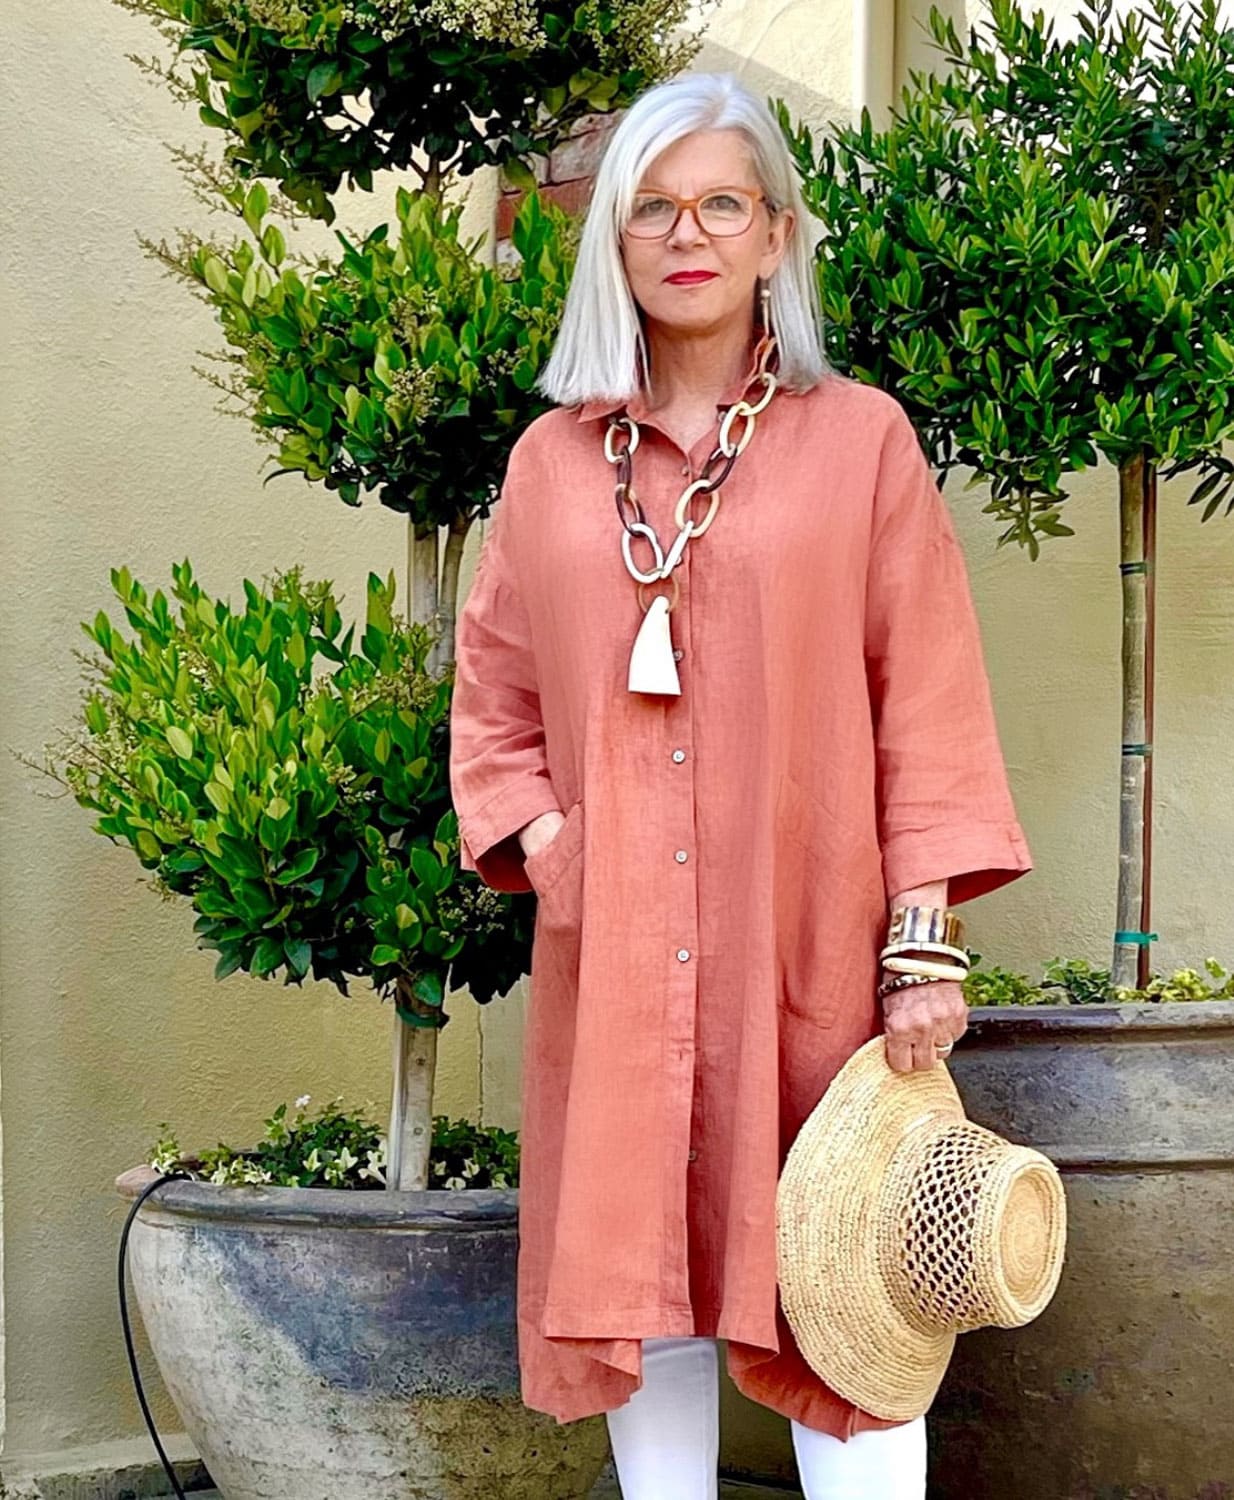 over 50 style blogger cindy hattersley in j jill dress, ibu movement necklace and banana republic hat